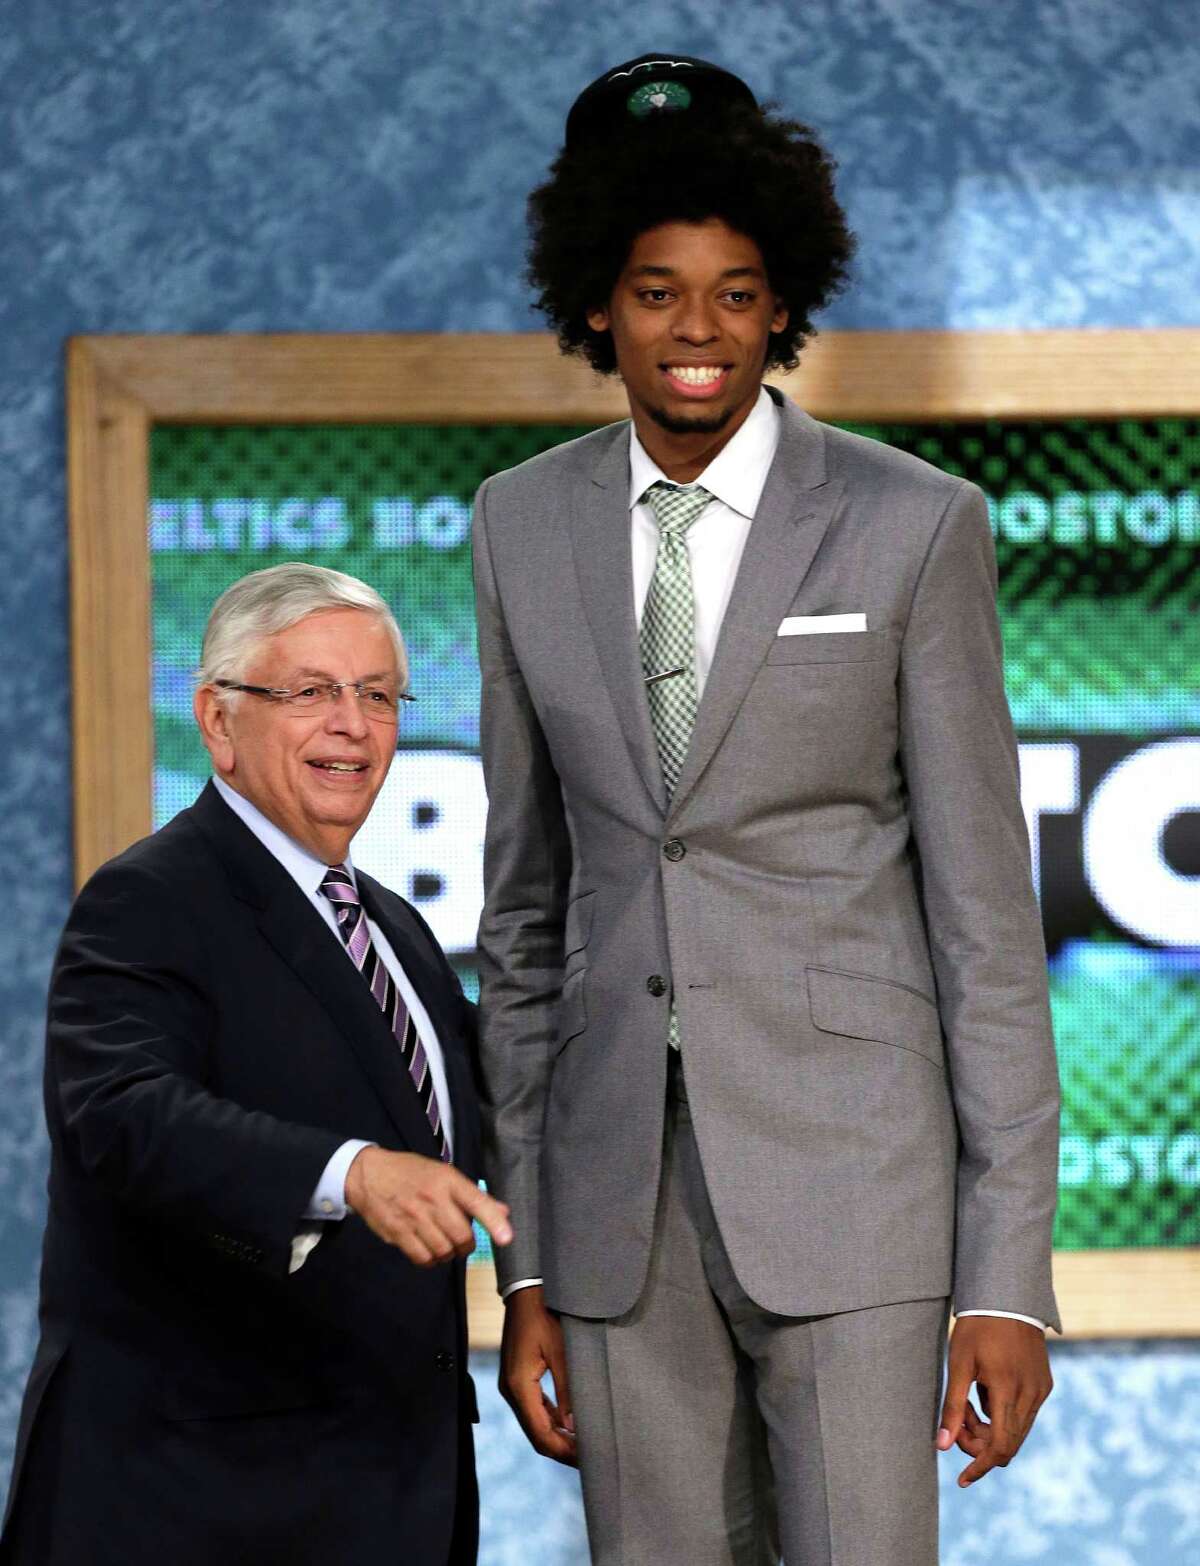 NBA Commissioner David Stern, left, stands with Lucas Nogueira, of Brazil, who was selected by the Boston Celtics in the first round of the NBA basketball draft, Thursday, June 27, 2013, in New York. (AP Photo/Kathy Willens) ORG XMIT: NYKW130